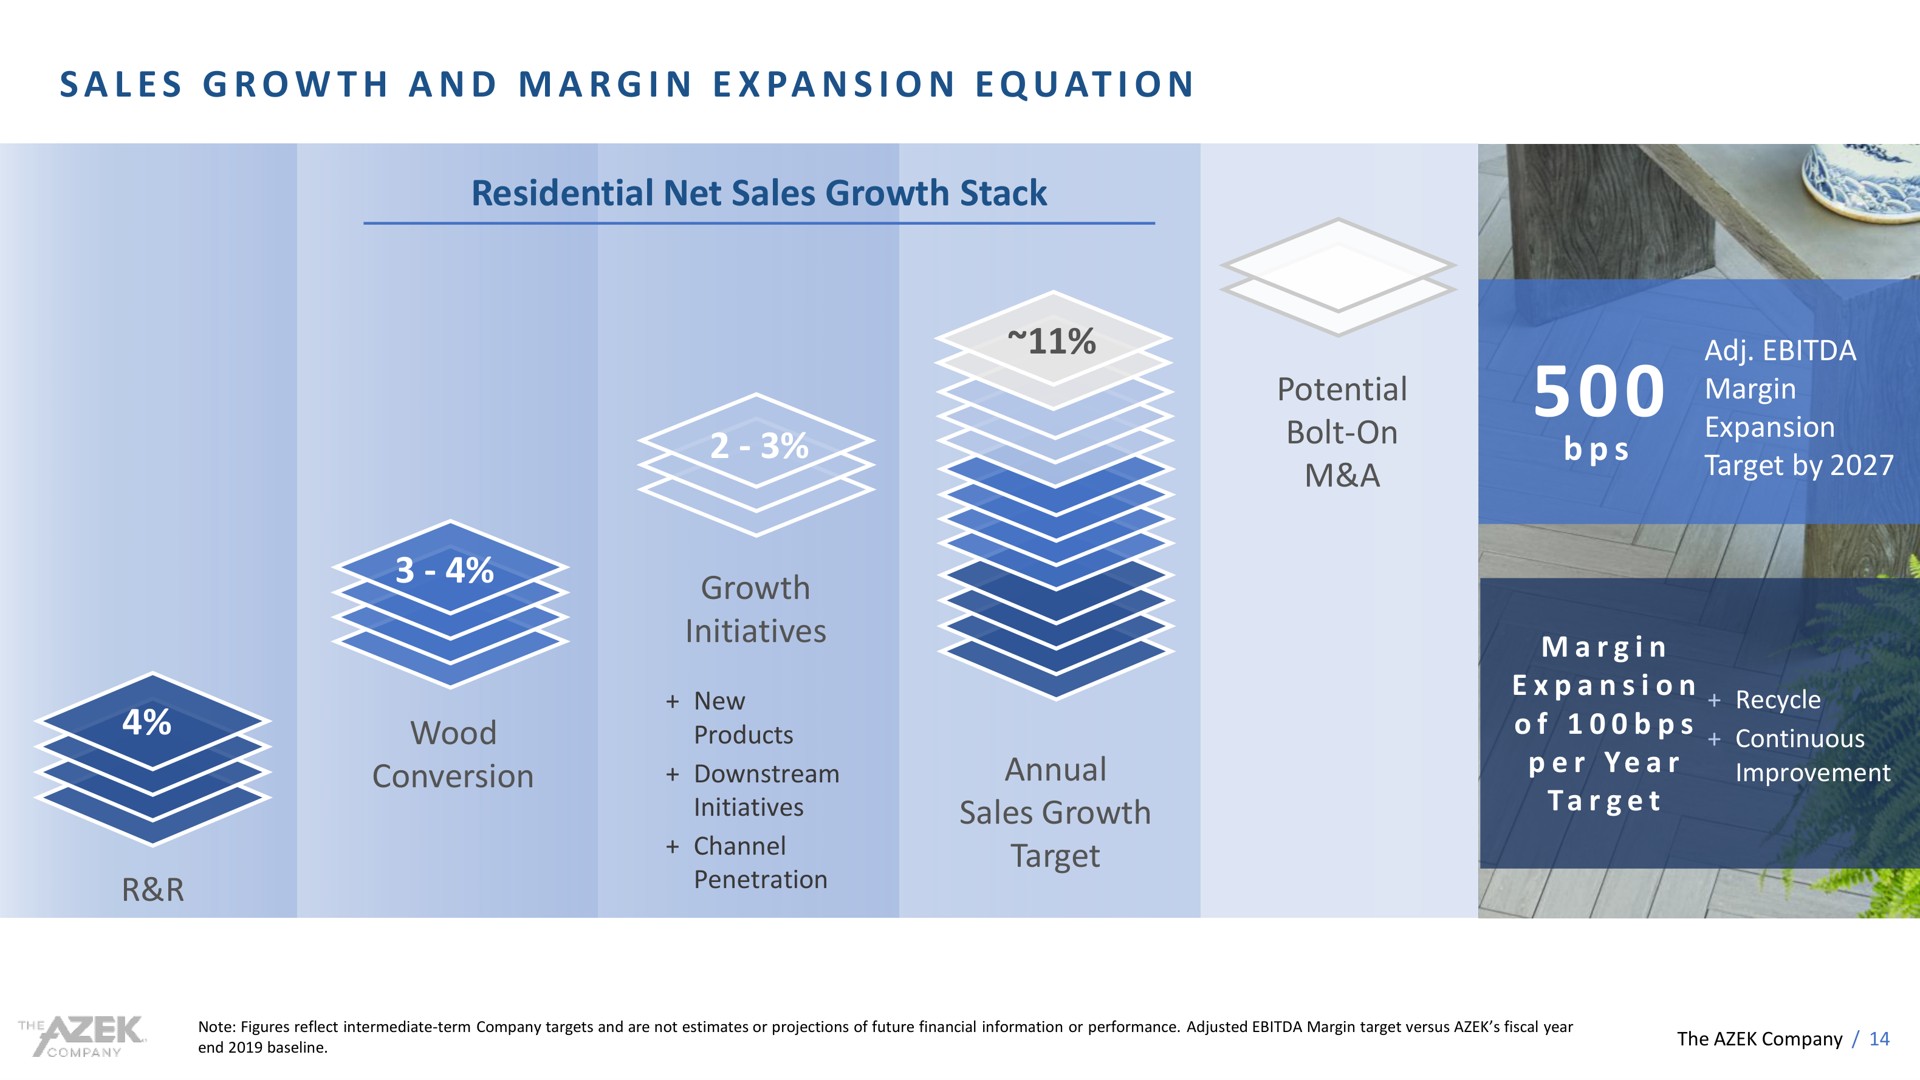 a a a i i at i residential net sales growth stack wood conversion growth initiatives potential bolt on a annual sales growth target and margin expansion equation | Azek